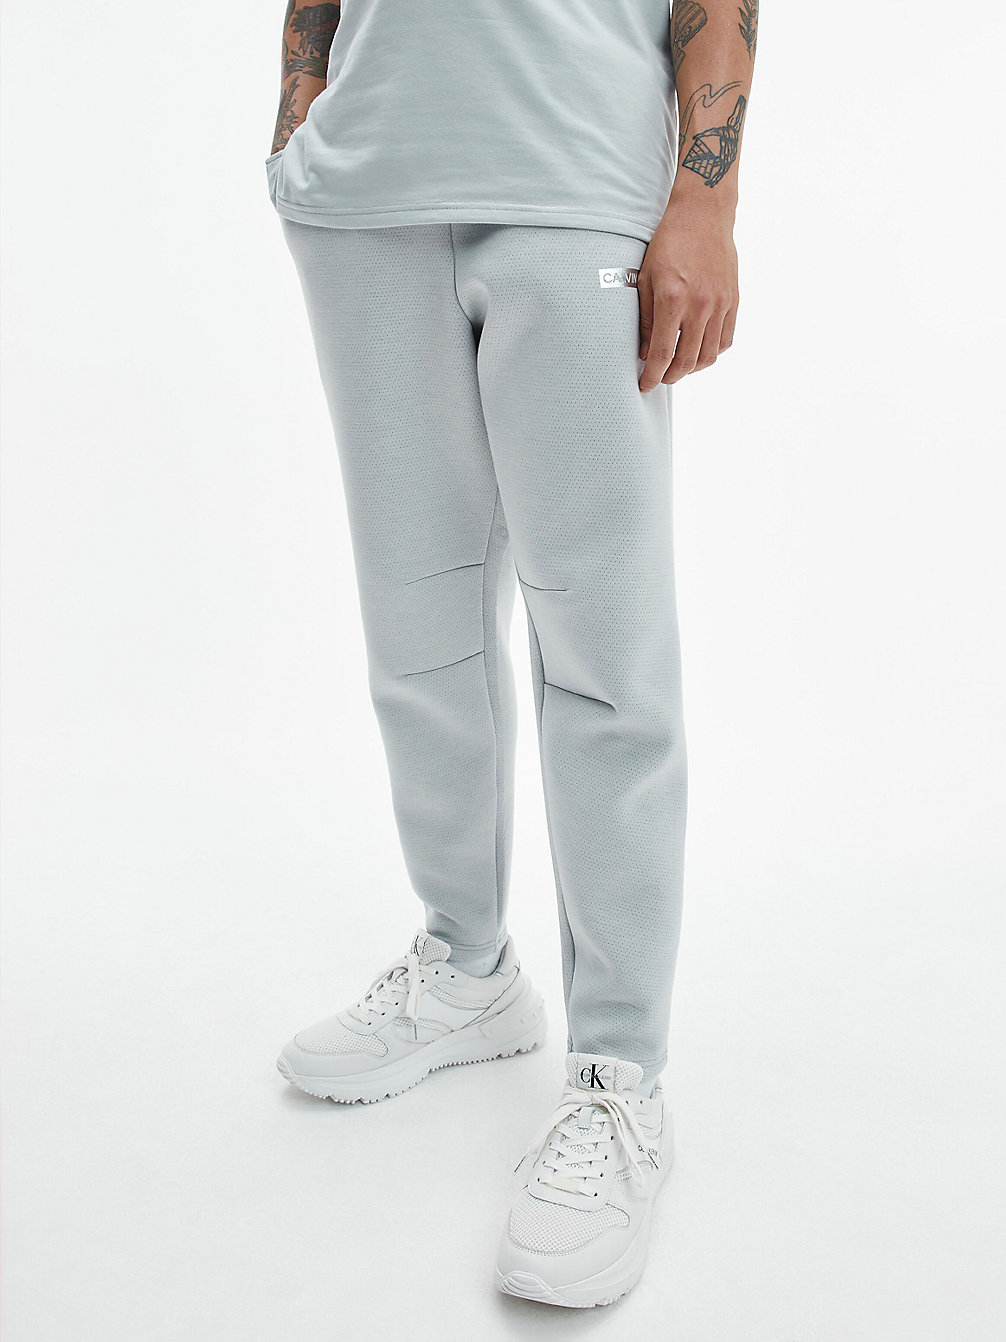 Pantalón De Chándal Tapered > HIGH RISE / CYBER YELLOW > undefined mujer > Calvin Klein